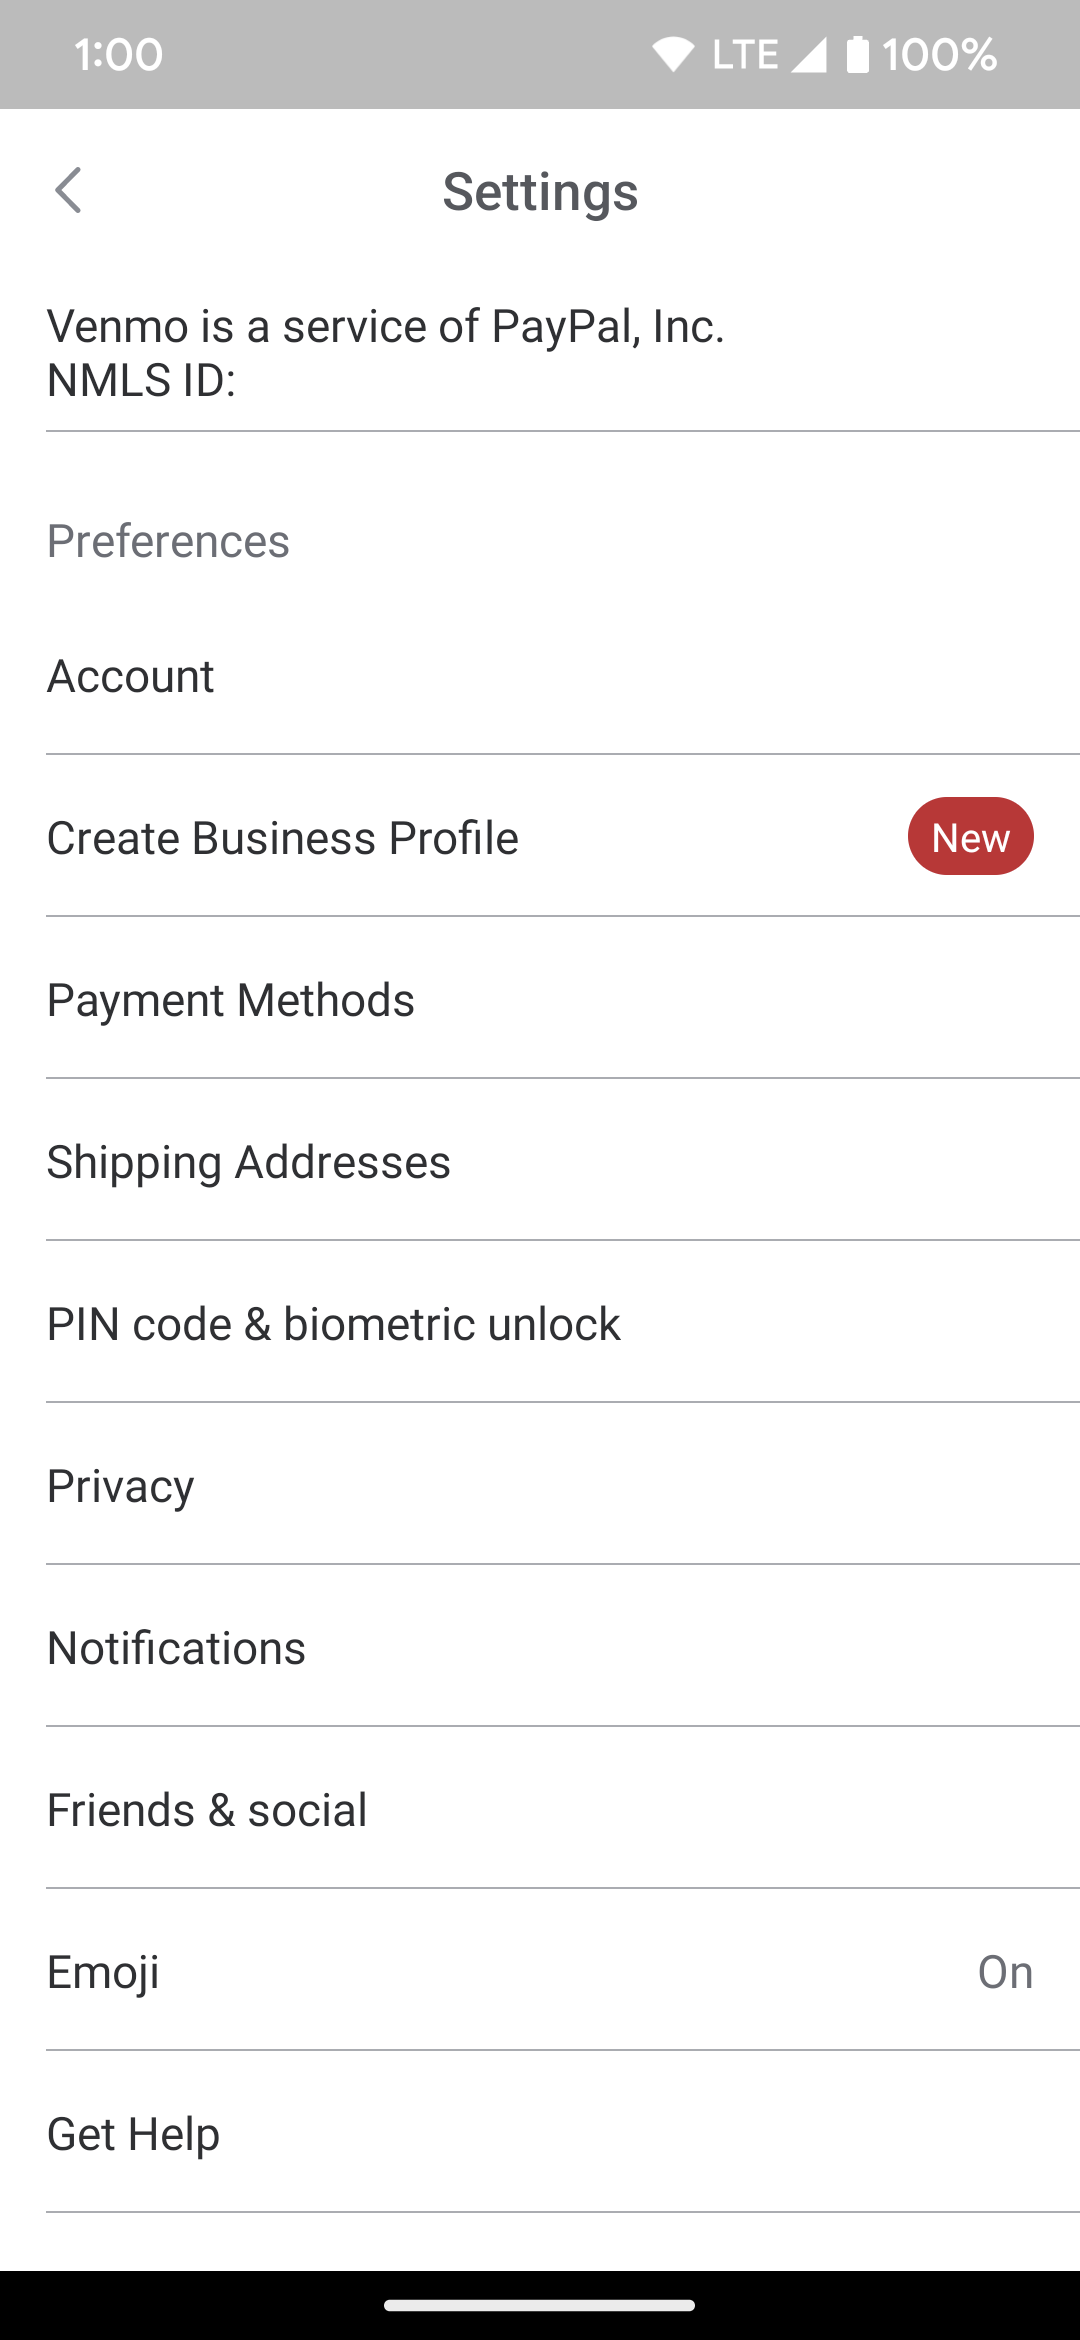 The main settings page for a Venmo account.